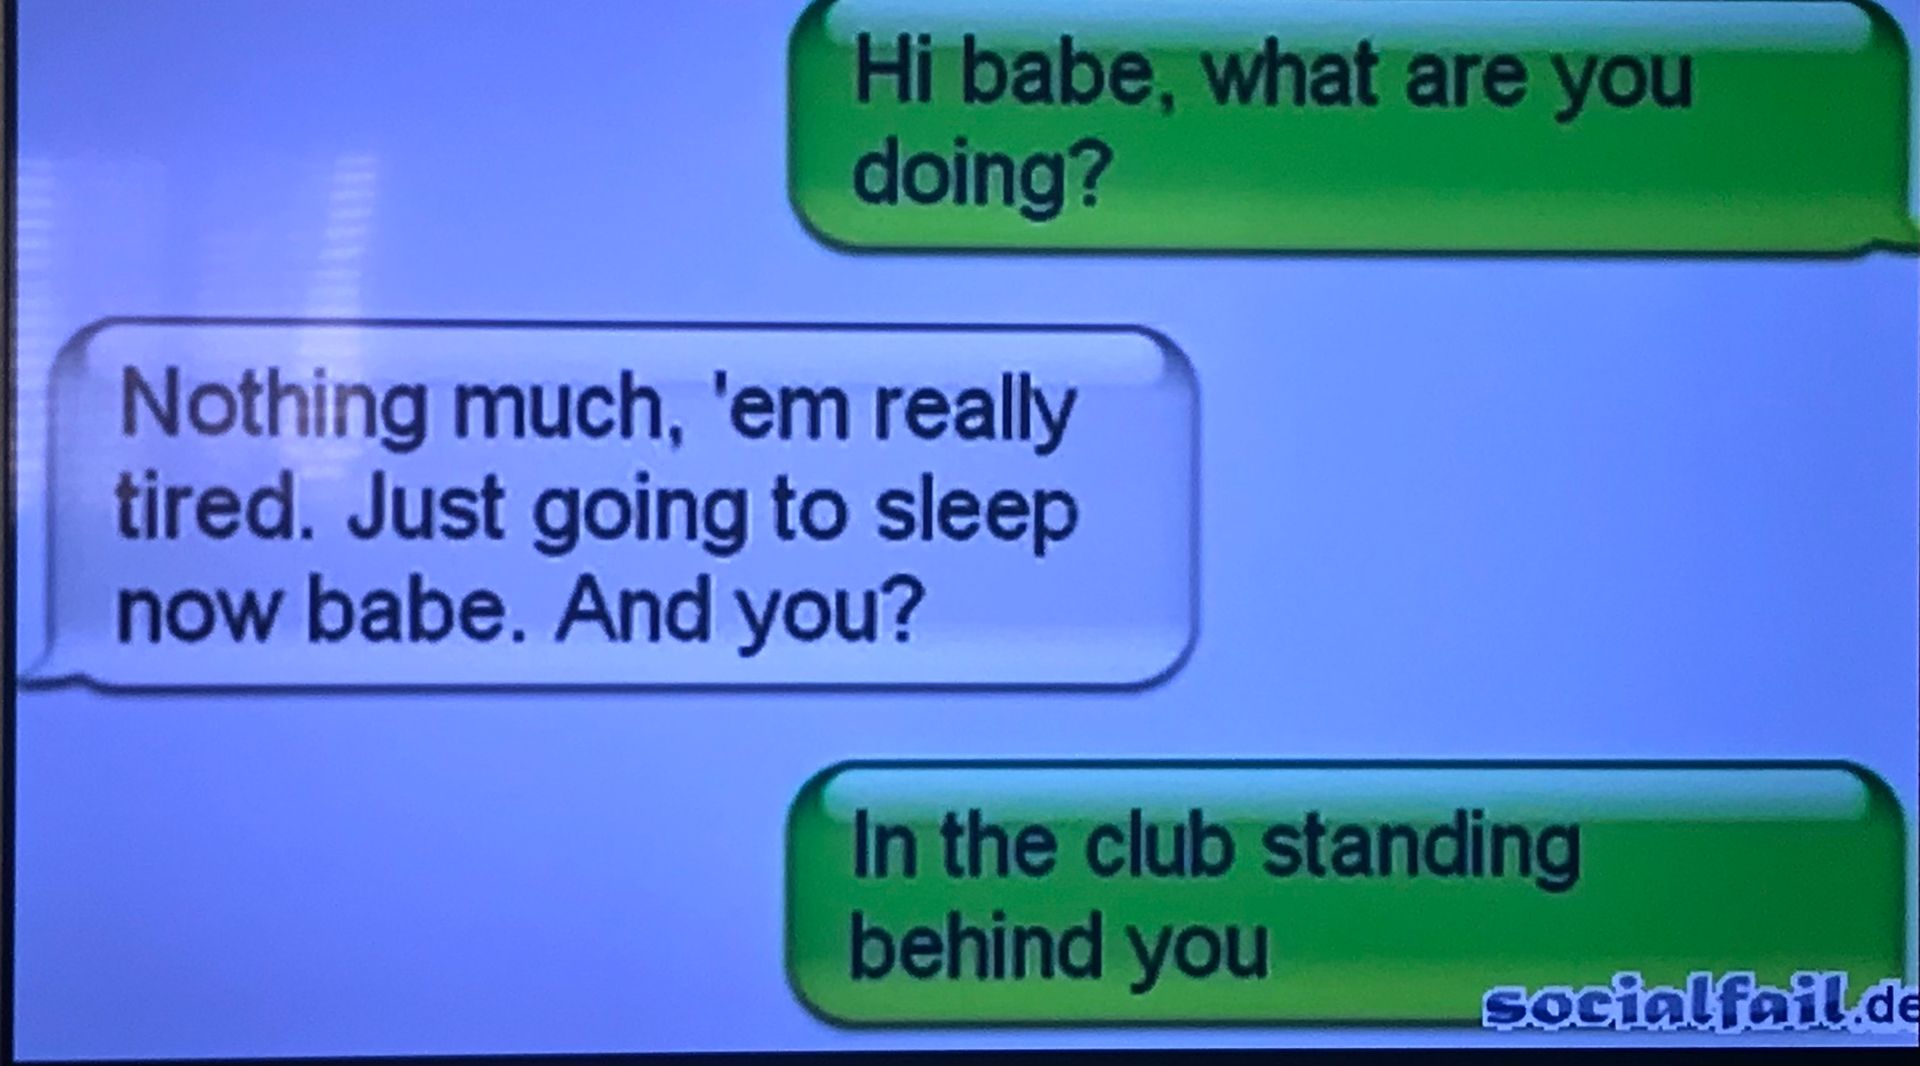 Hi babe, what are you
doing?
Nothing much, 'em really
tired. Just going to sleep
now babe. And you?
In the club standing
behind you
socialfail.de